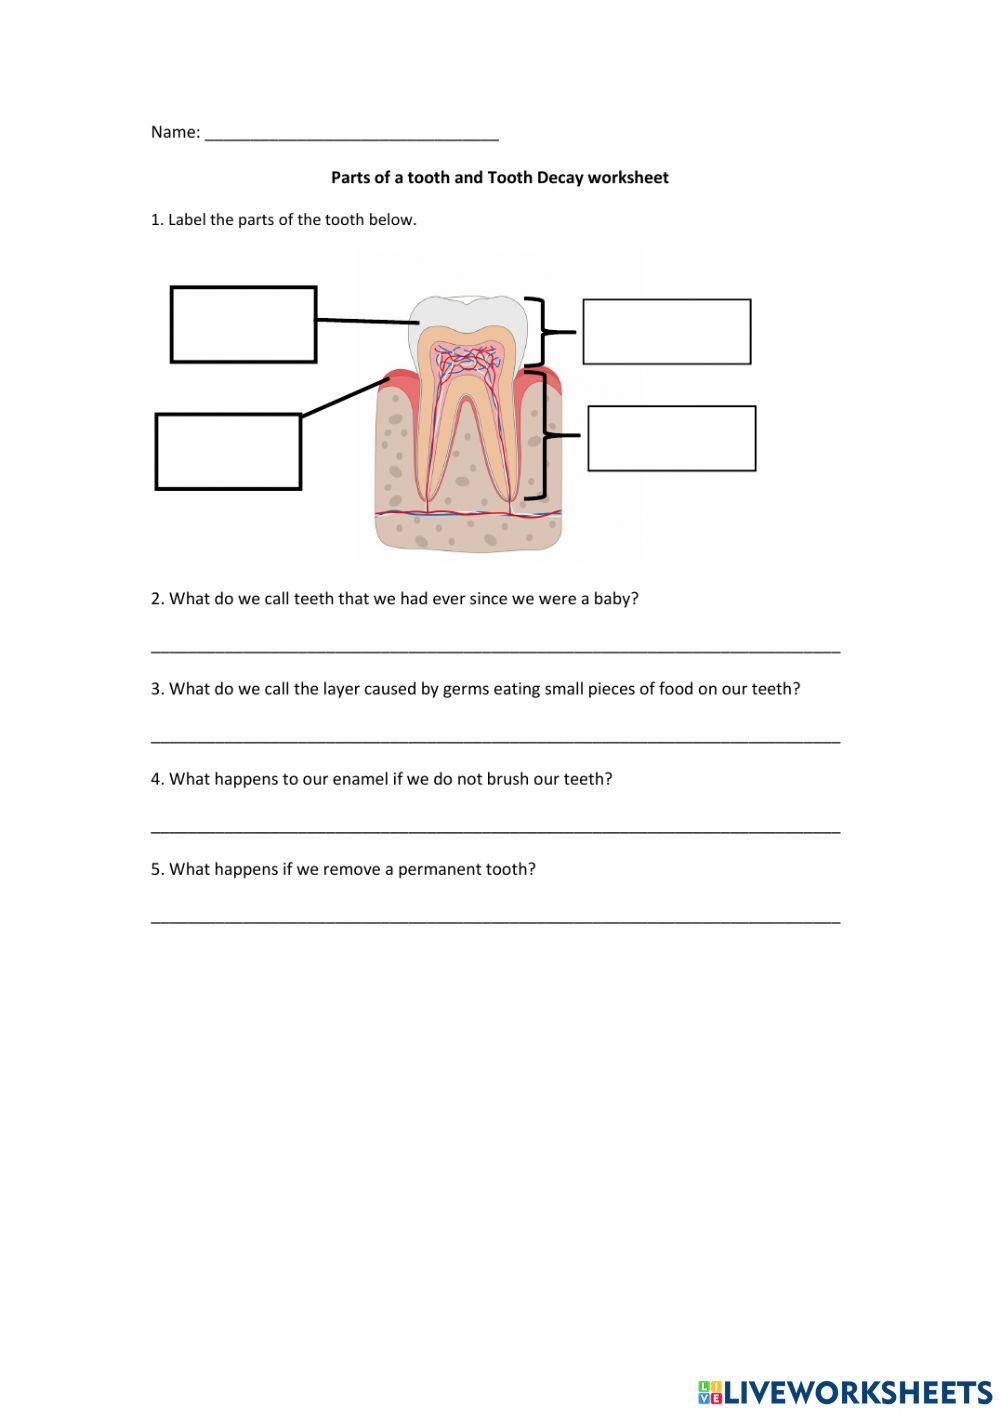 Parts of a tooth and tooth decay worksheet